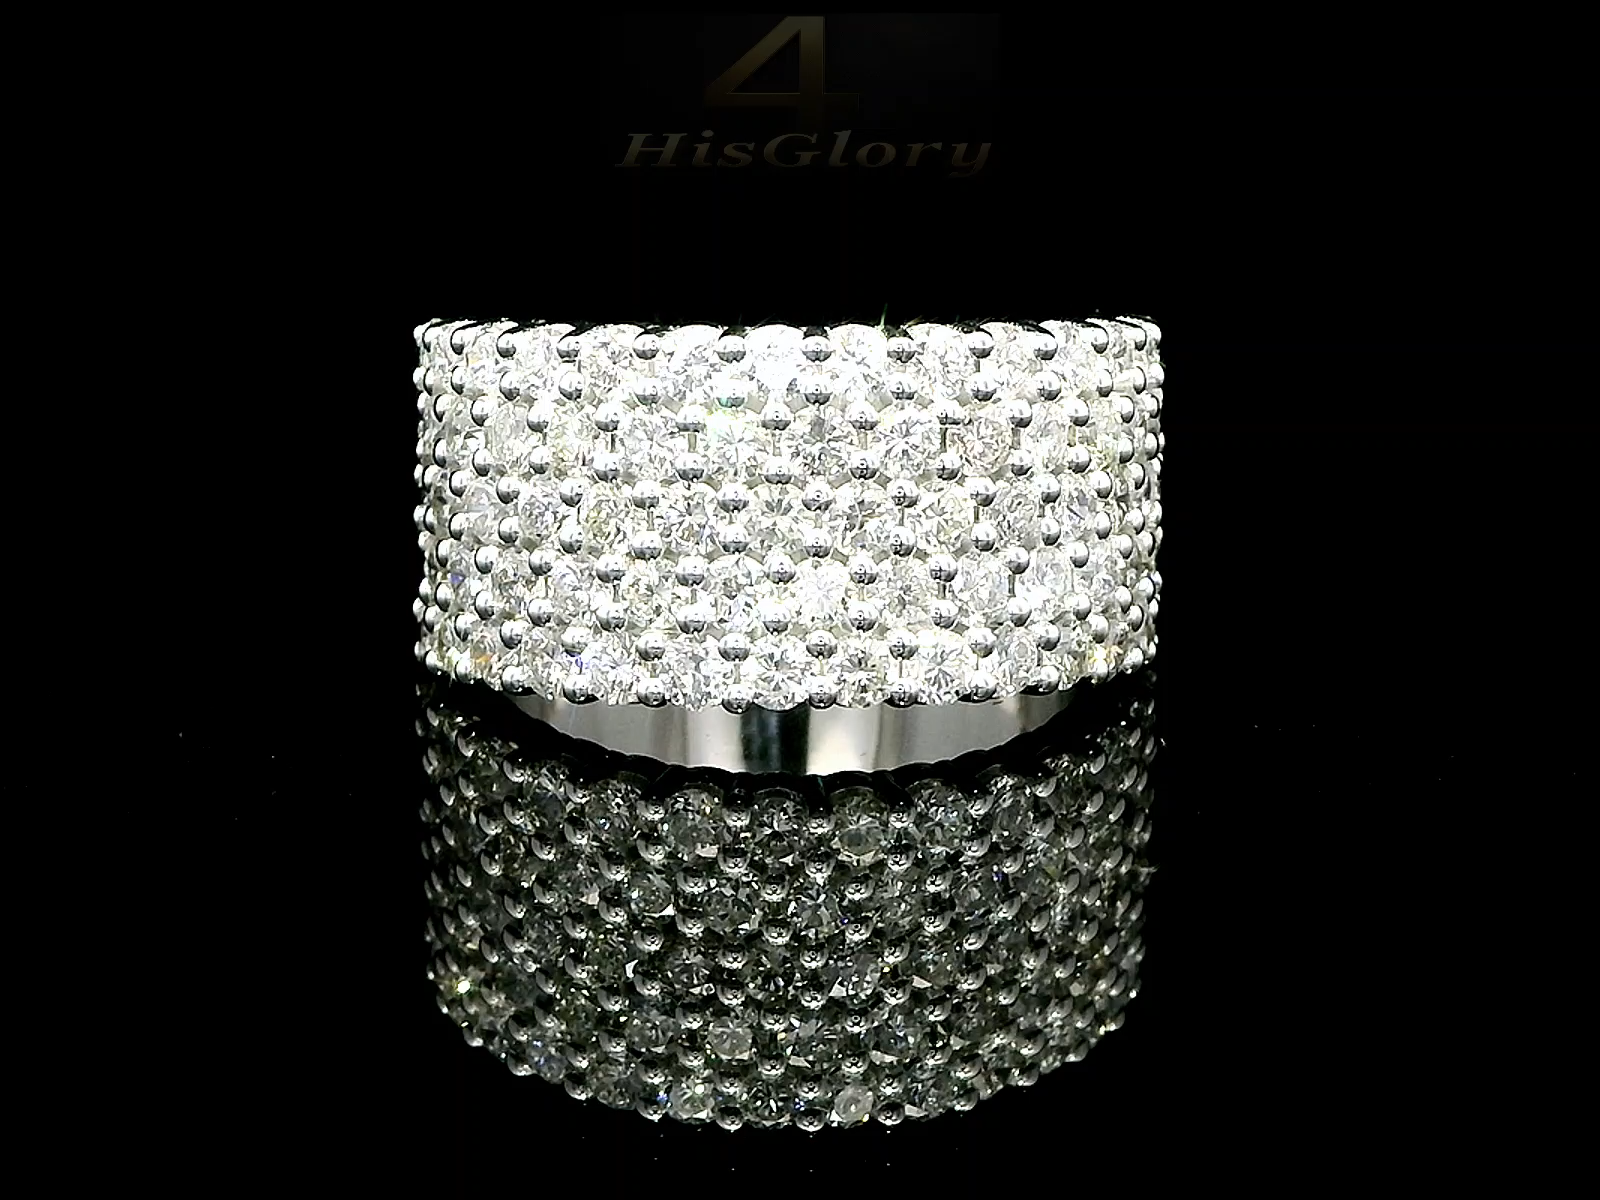 Close-up image of a white gold ring encrusted with multiple small diamonds, reflecting light on a black surface. The ring features a pattern of closely set diamonds creating a sparkling effect.